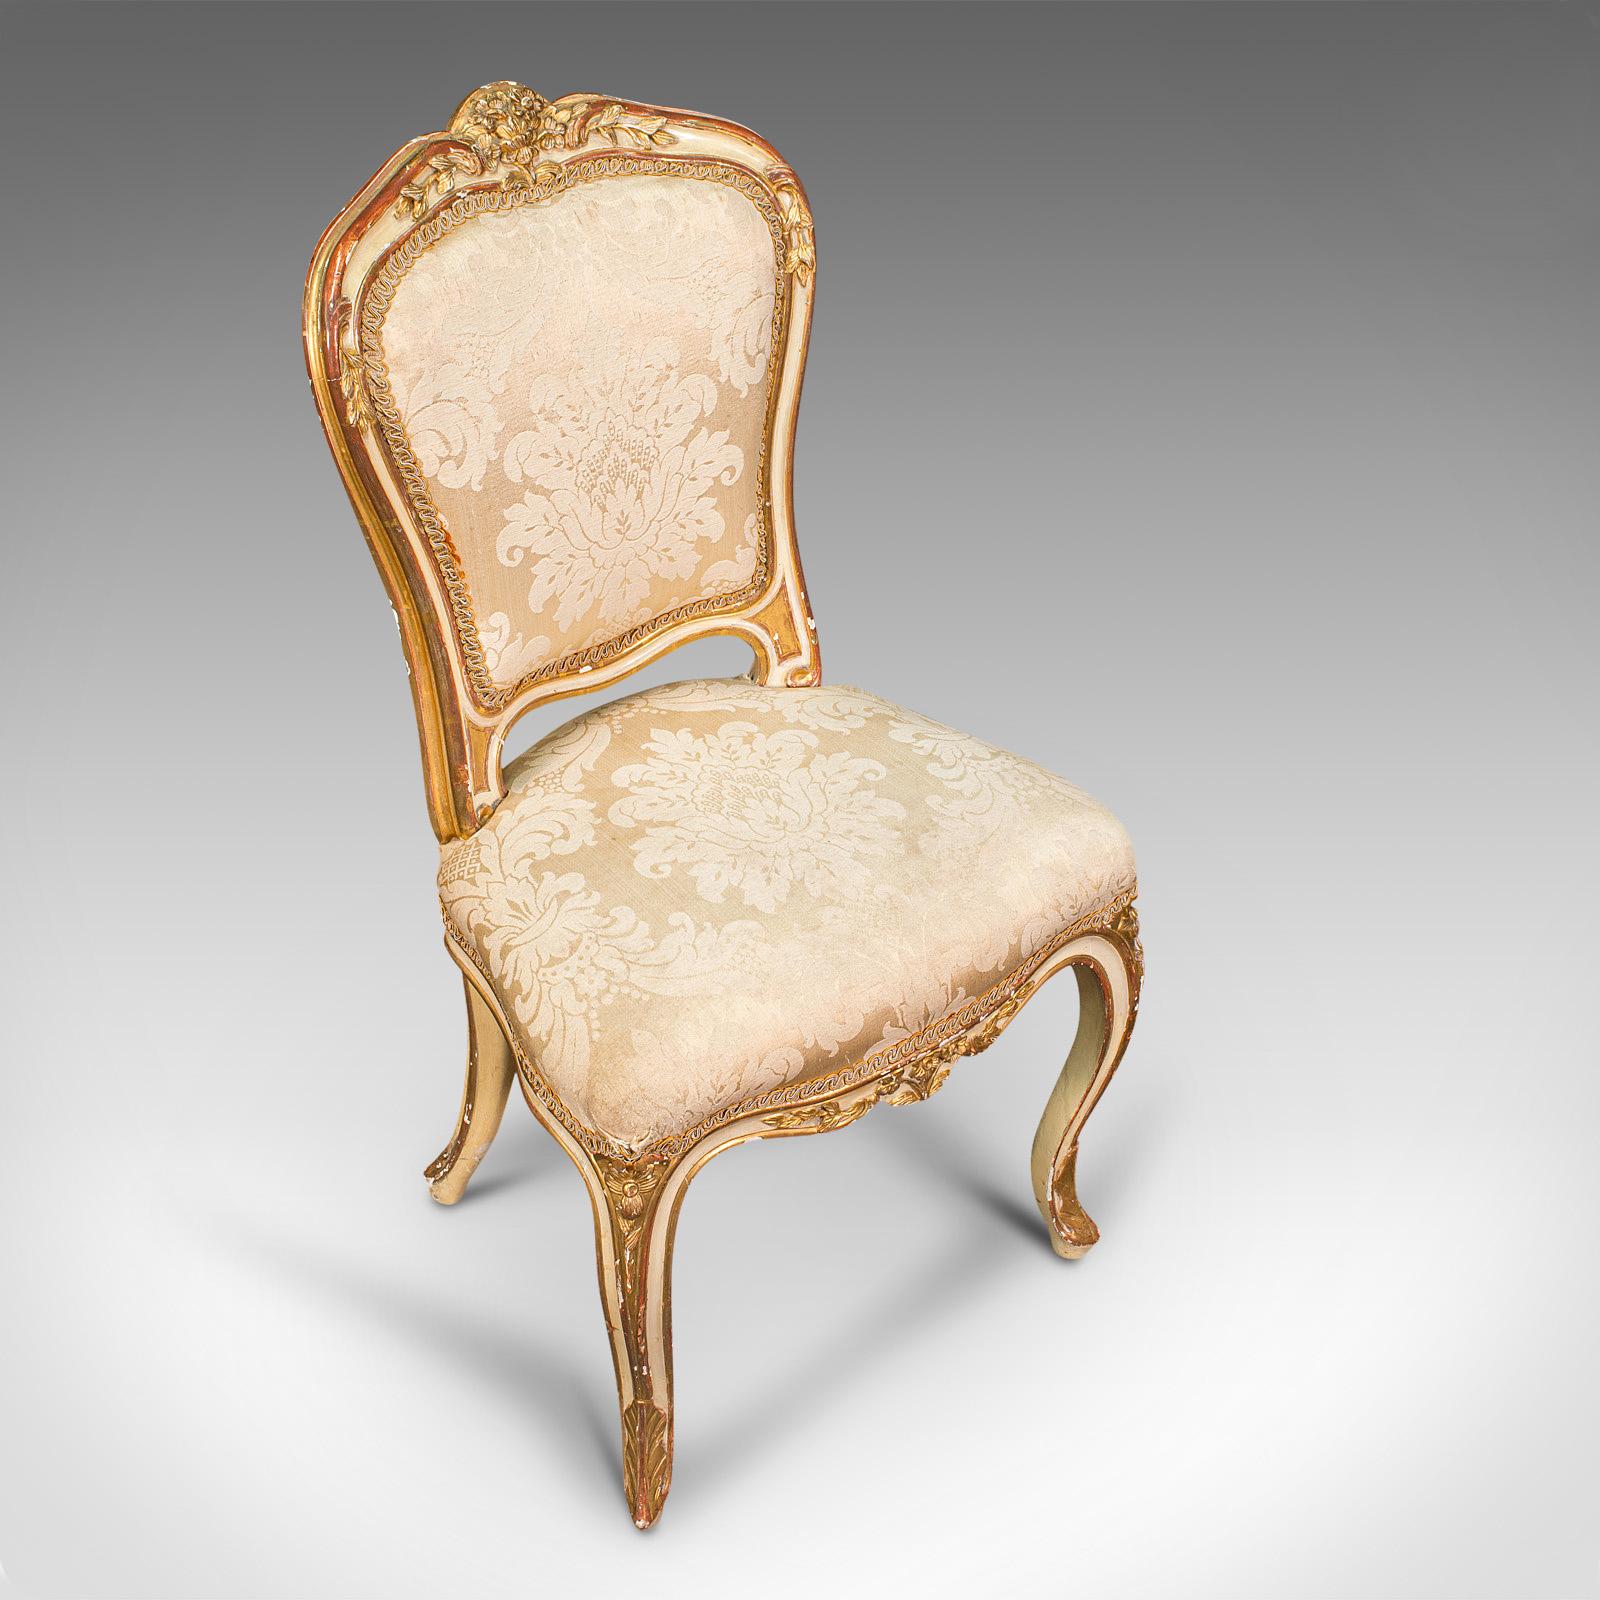 19th Century Antique Boudoir Chair, French, Giltwood, Bedroom Dressing Seat, Victorian, 1900